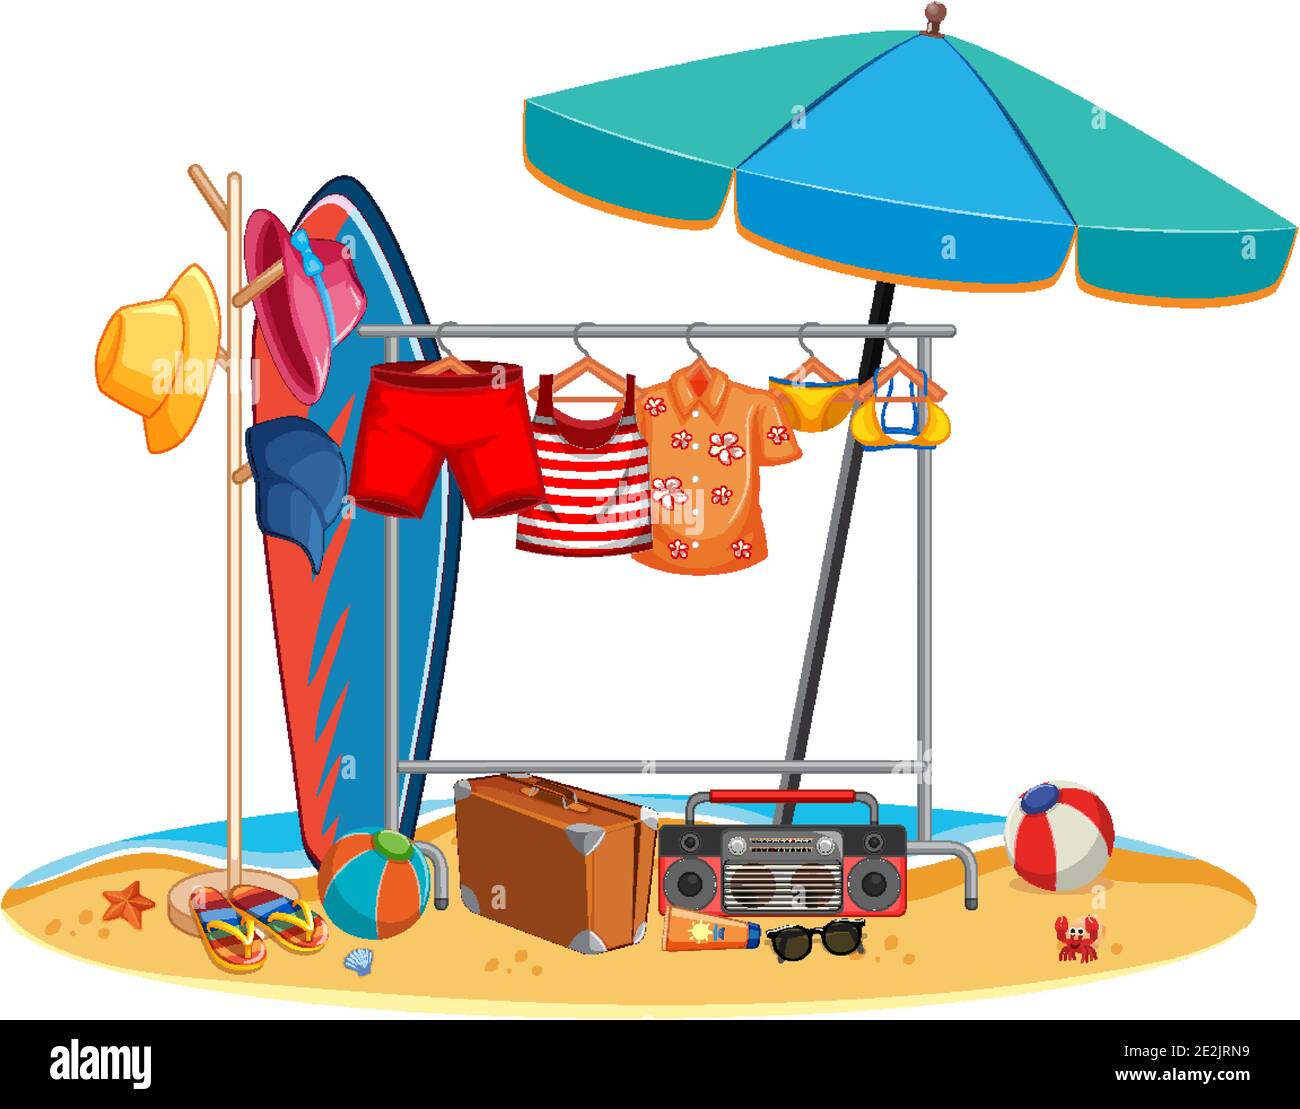 Isolated summer clothes hanging outdoor illustration Stock Vector